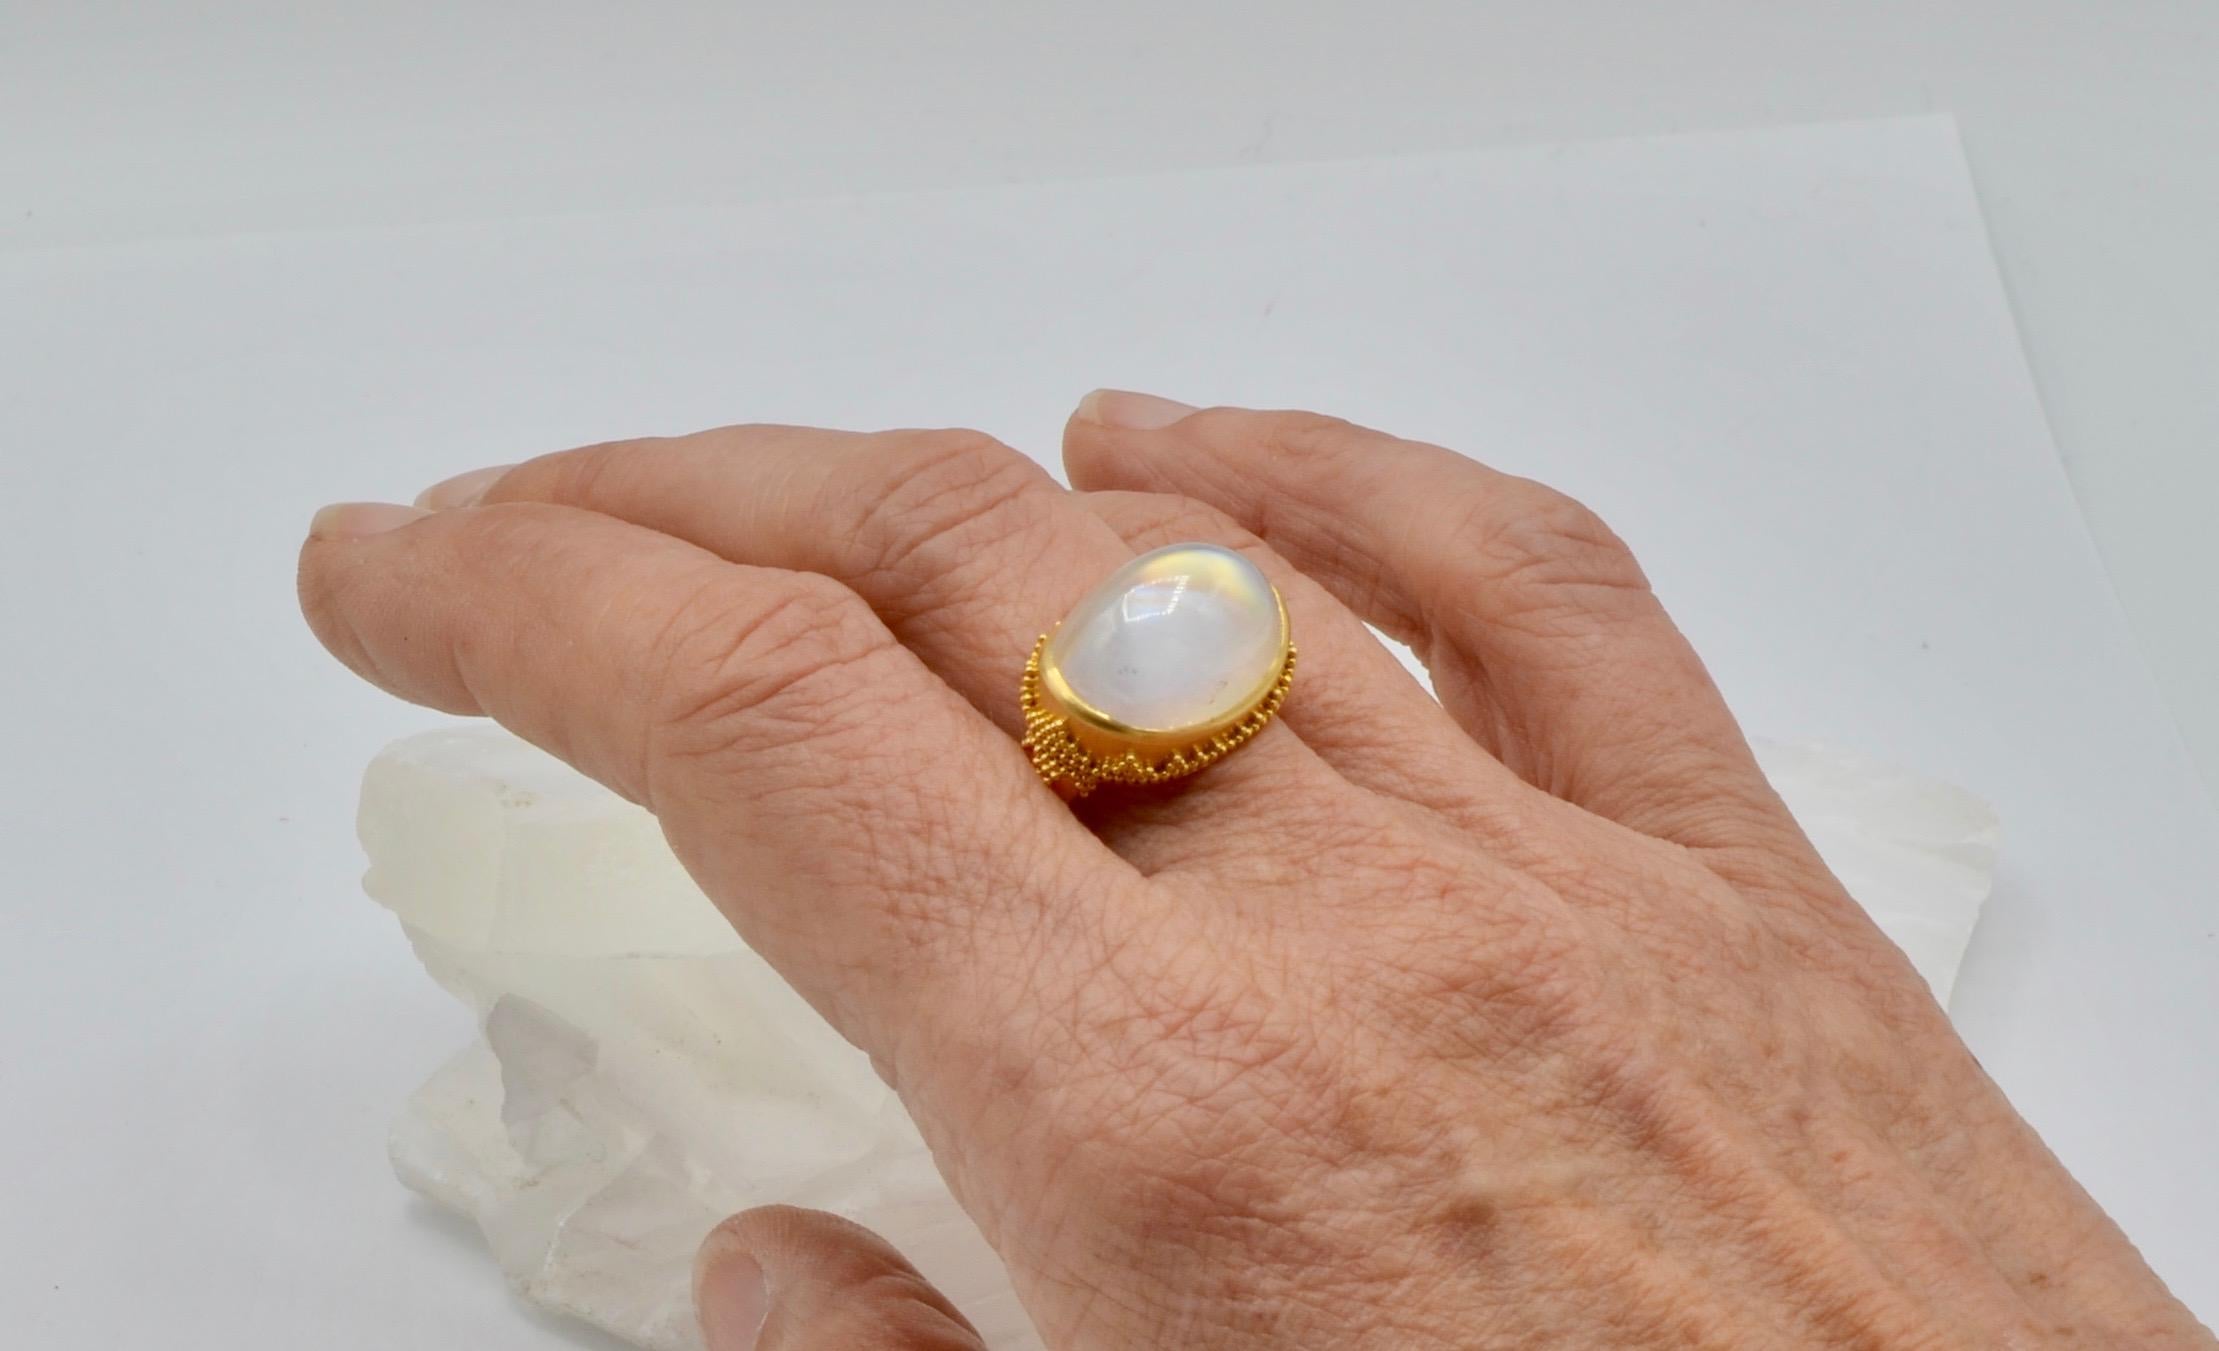 This  Steven Battelle  designed moonstone ring is reminiscent of the Aroura Borealis. It has a mesmerizing rainbow effect as you move. To see it is to really appreciate the depth and energy. The 21.2 carat moonstone is set in 22 karat gold with